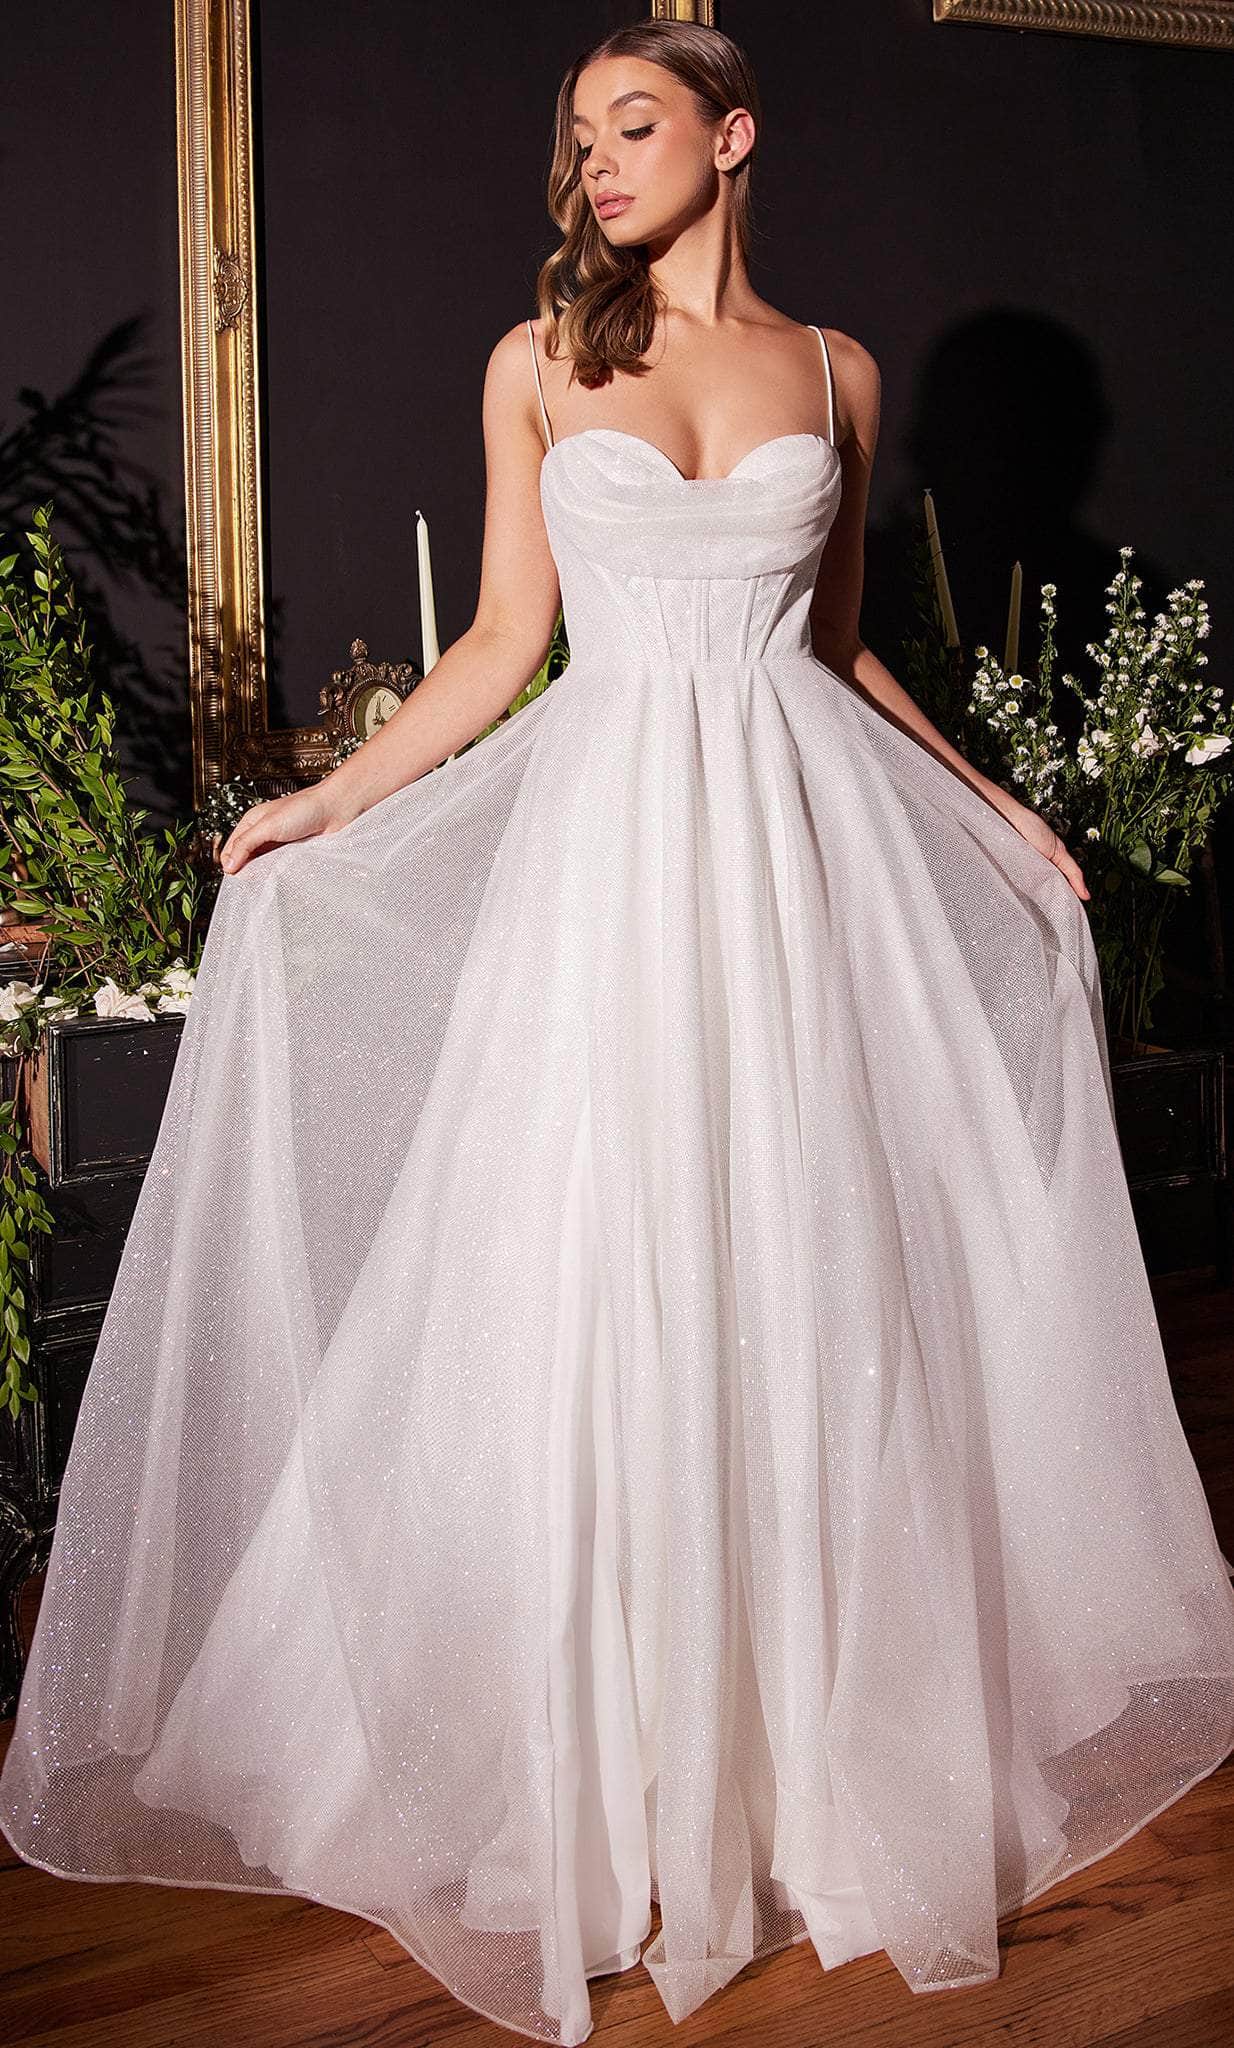 Image of Ladivine CD253W - Glittering Sleeveless Bridal Gown